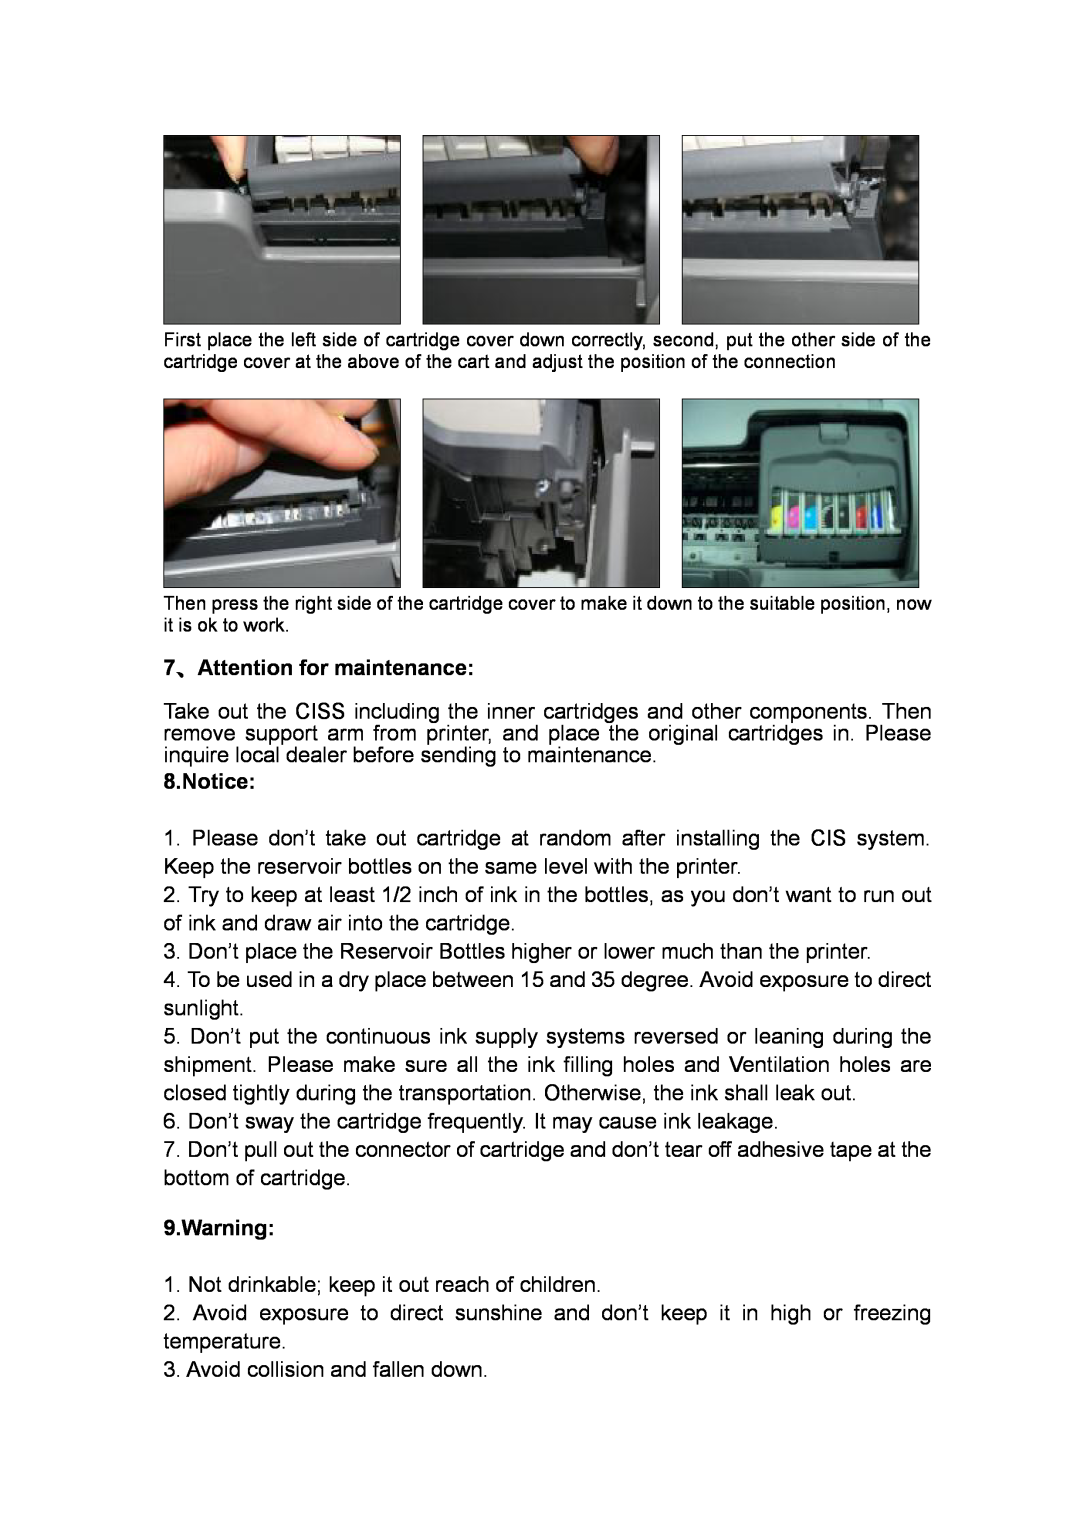 Epson R2400 manual 7、Attention for maintenance, Warning 